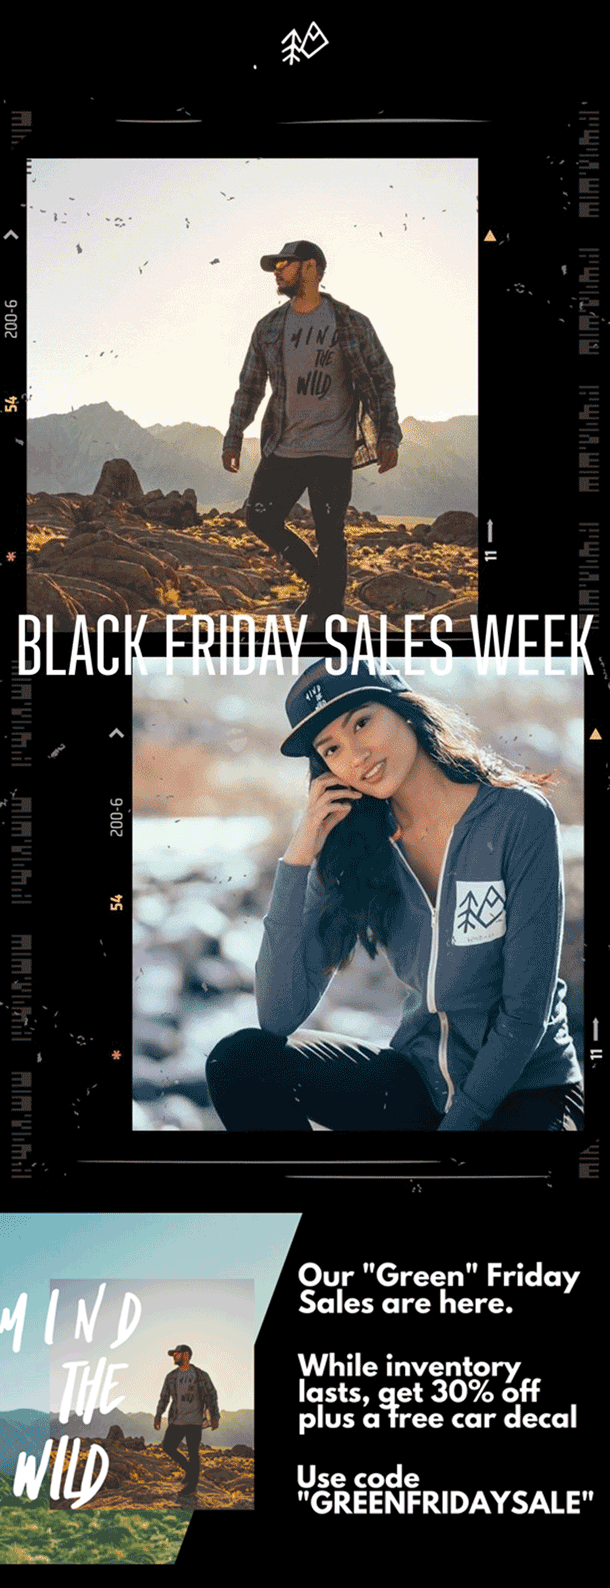 Wild + Co. Black Friday email example collage animated